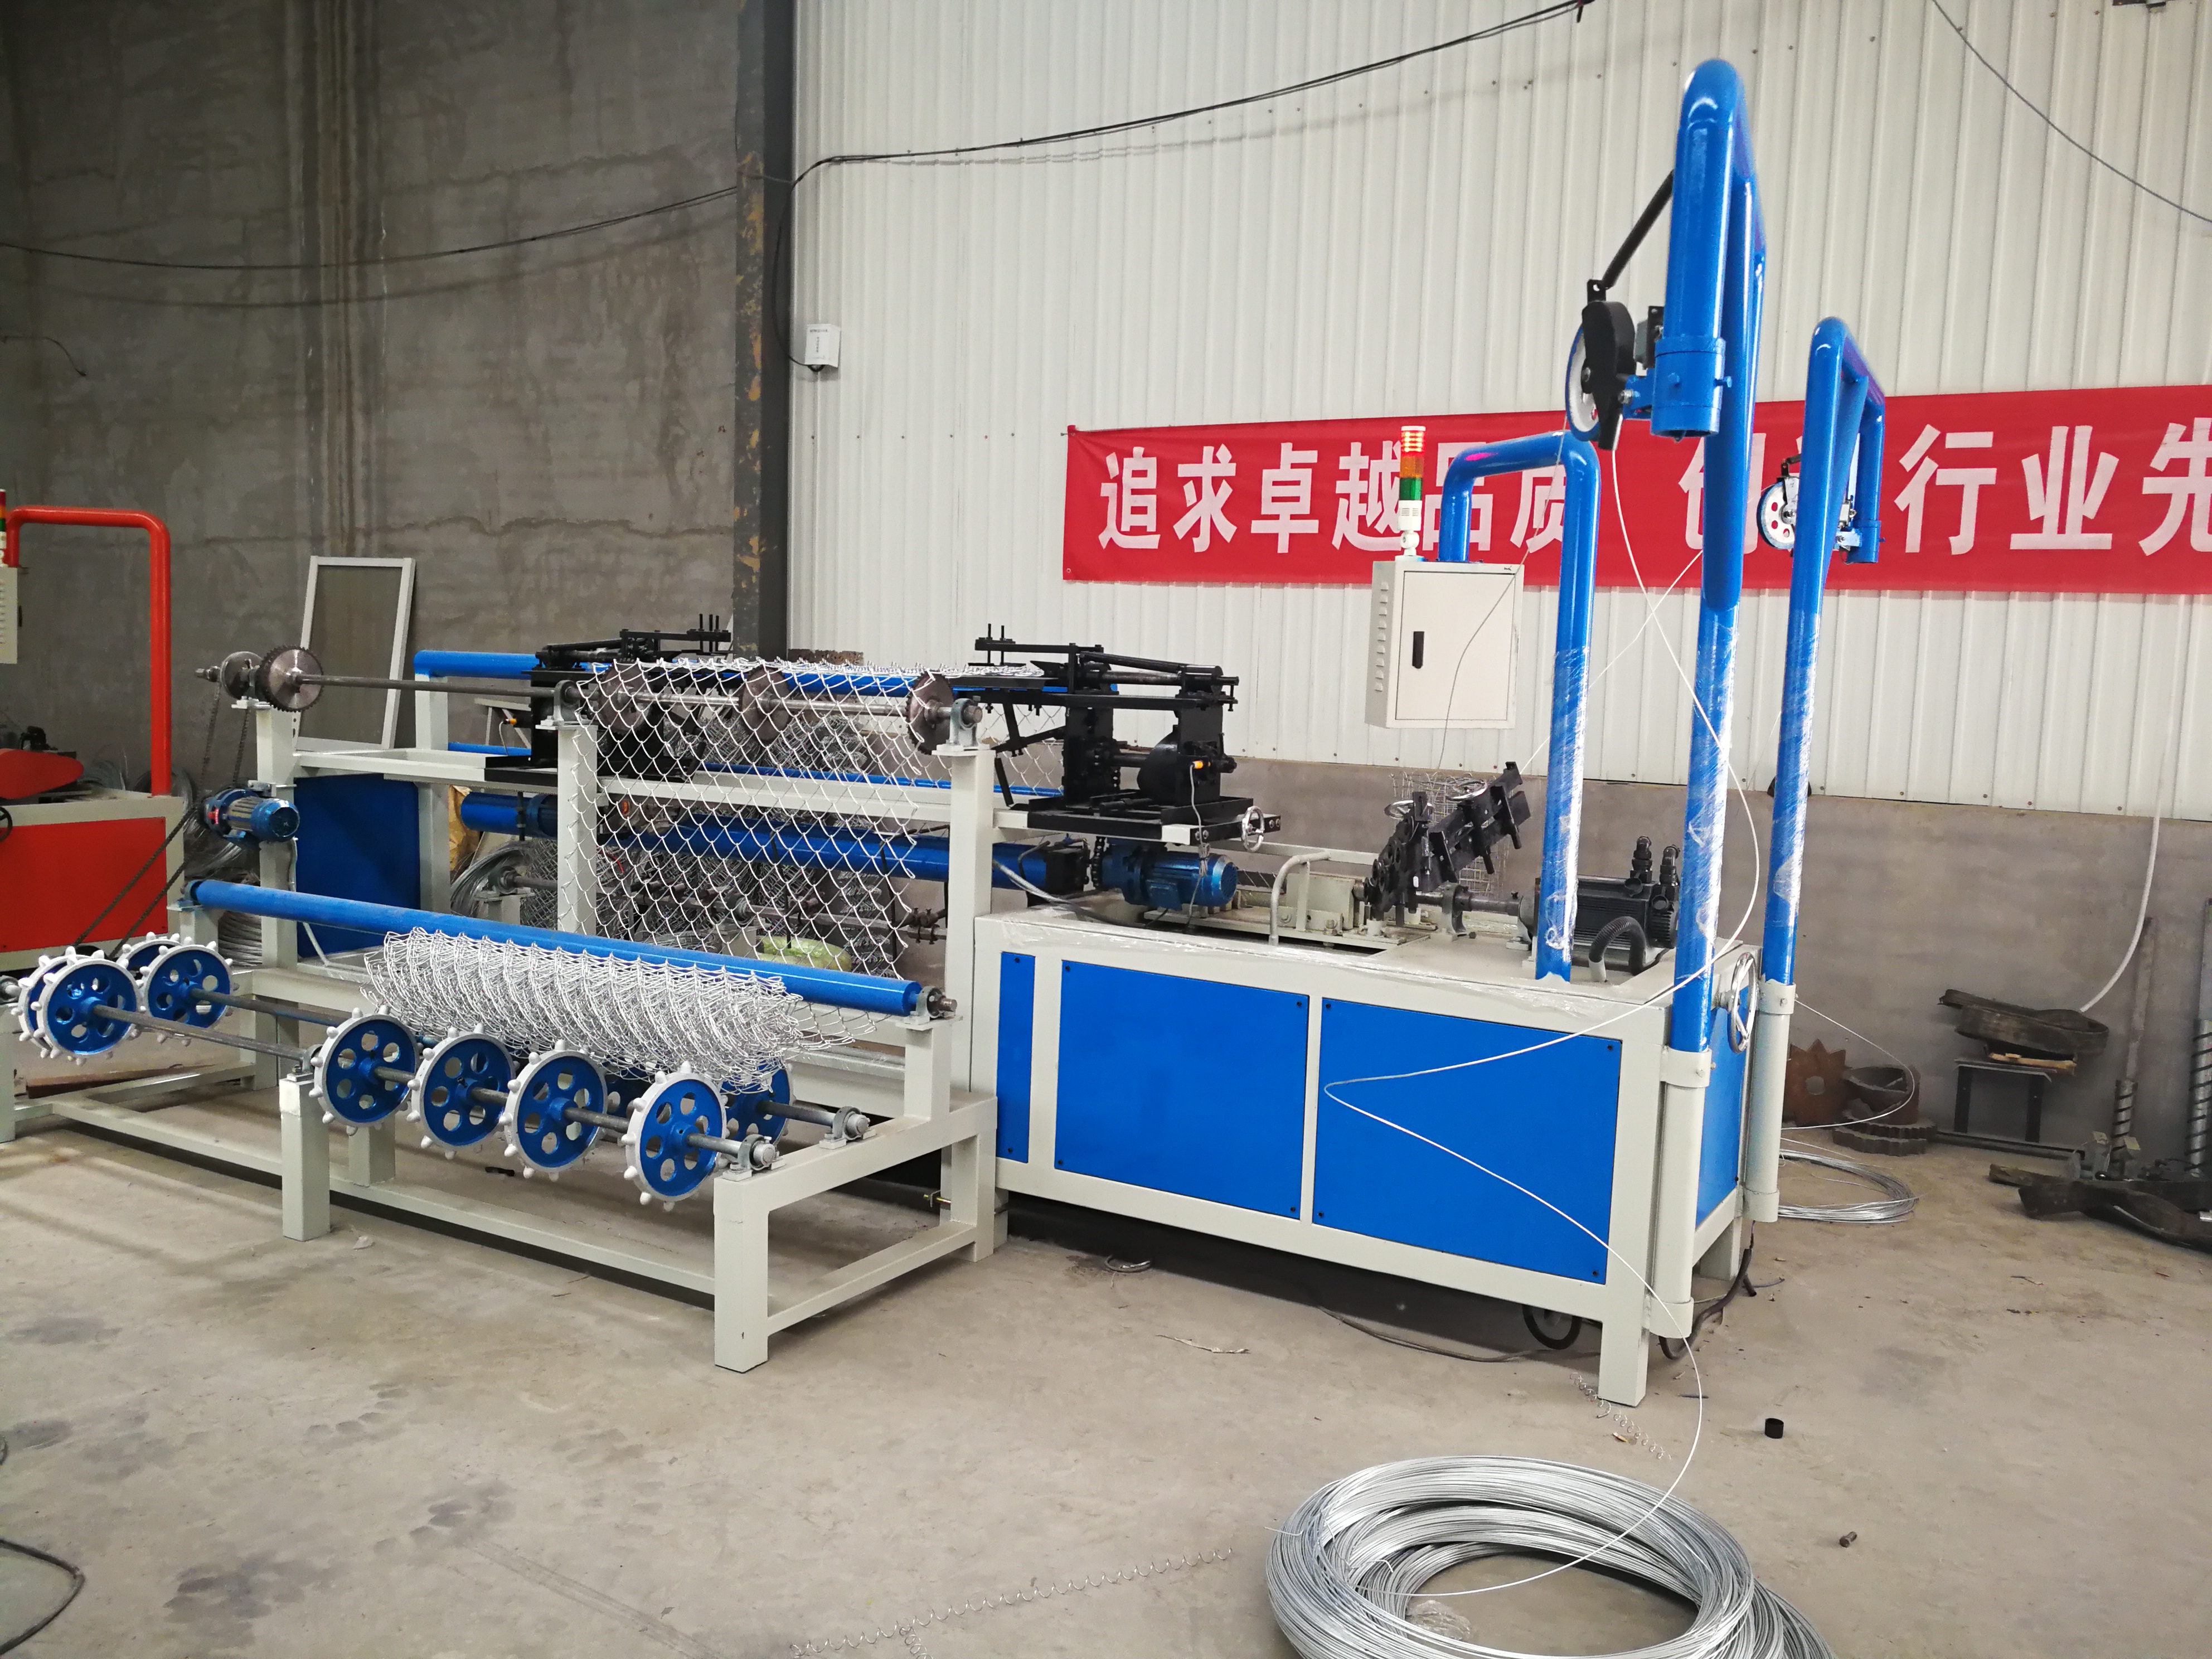 Reference factors for choosing a fully auto chain link fence machine manufacturer